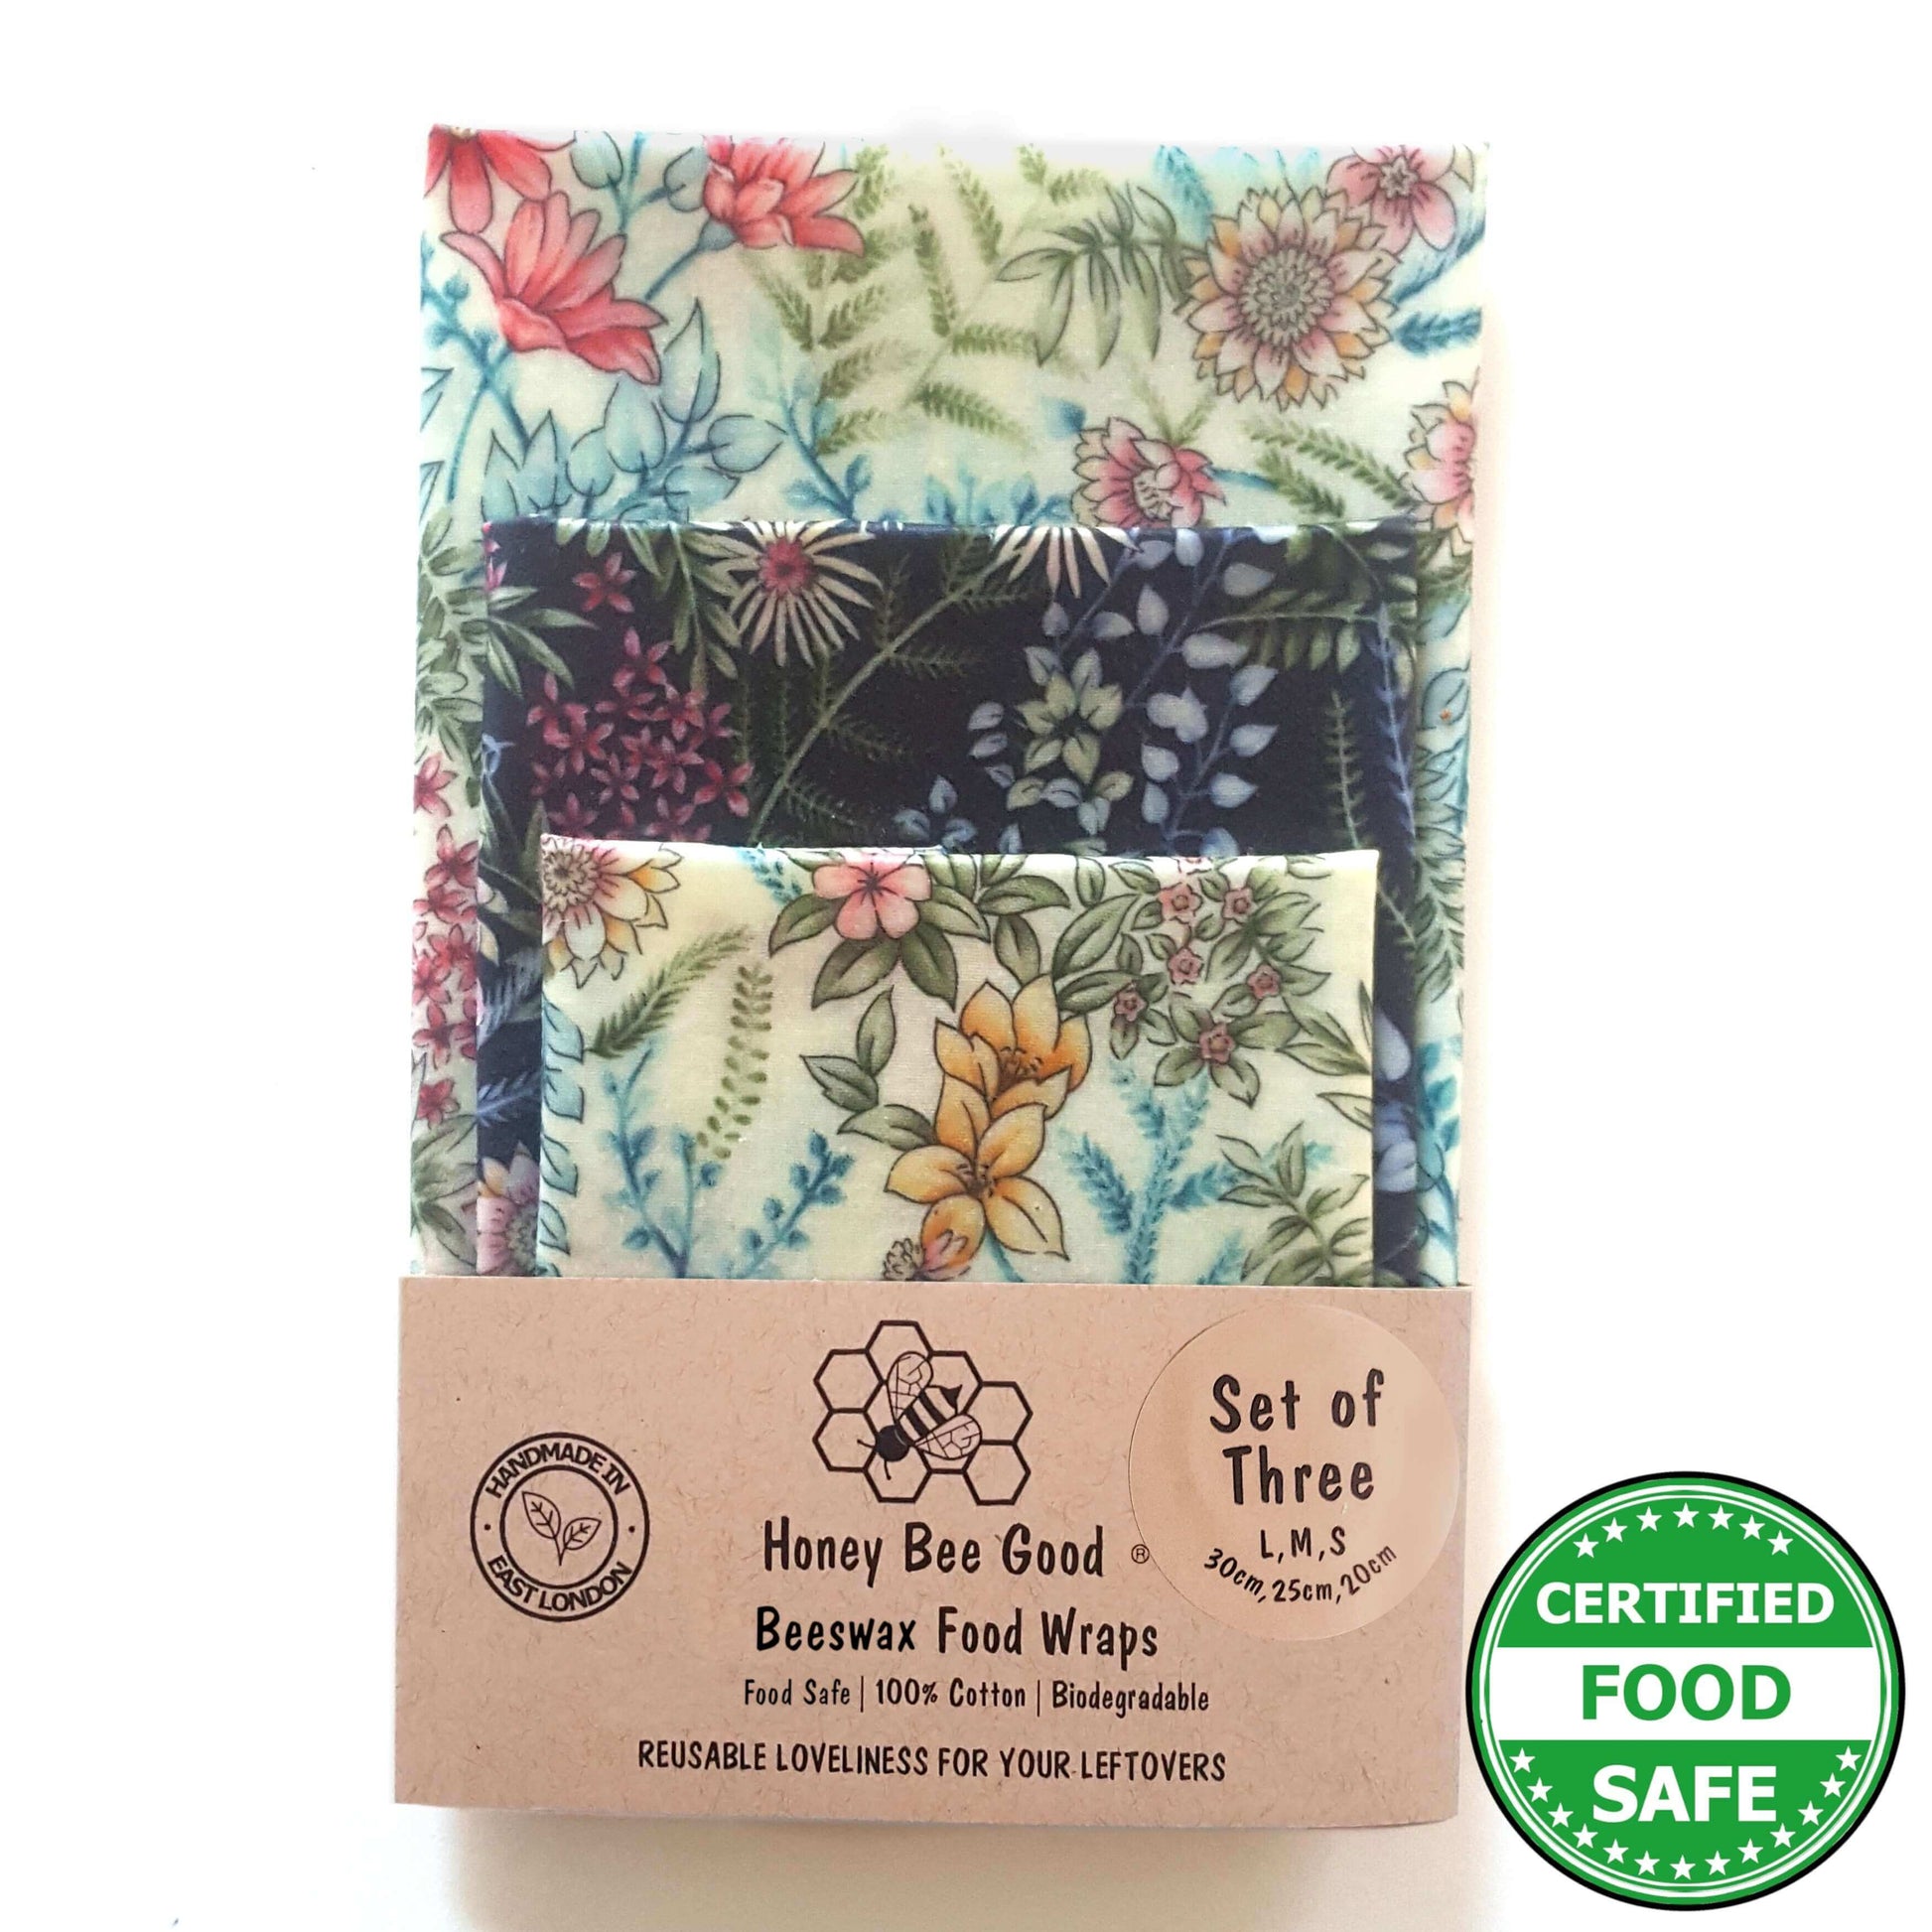 Reusable Beeswax Food Wraps 100% Hand Made in the UK by Honey Bee Good shown in Set of 3 Classic Botanical